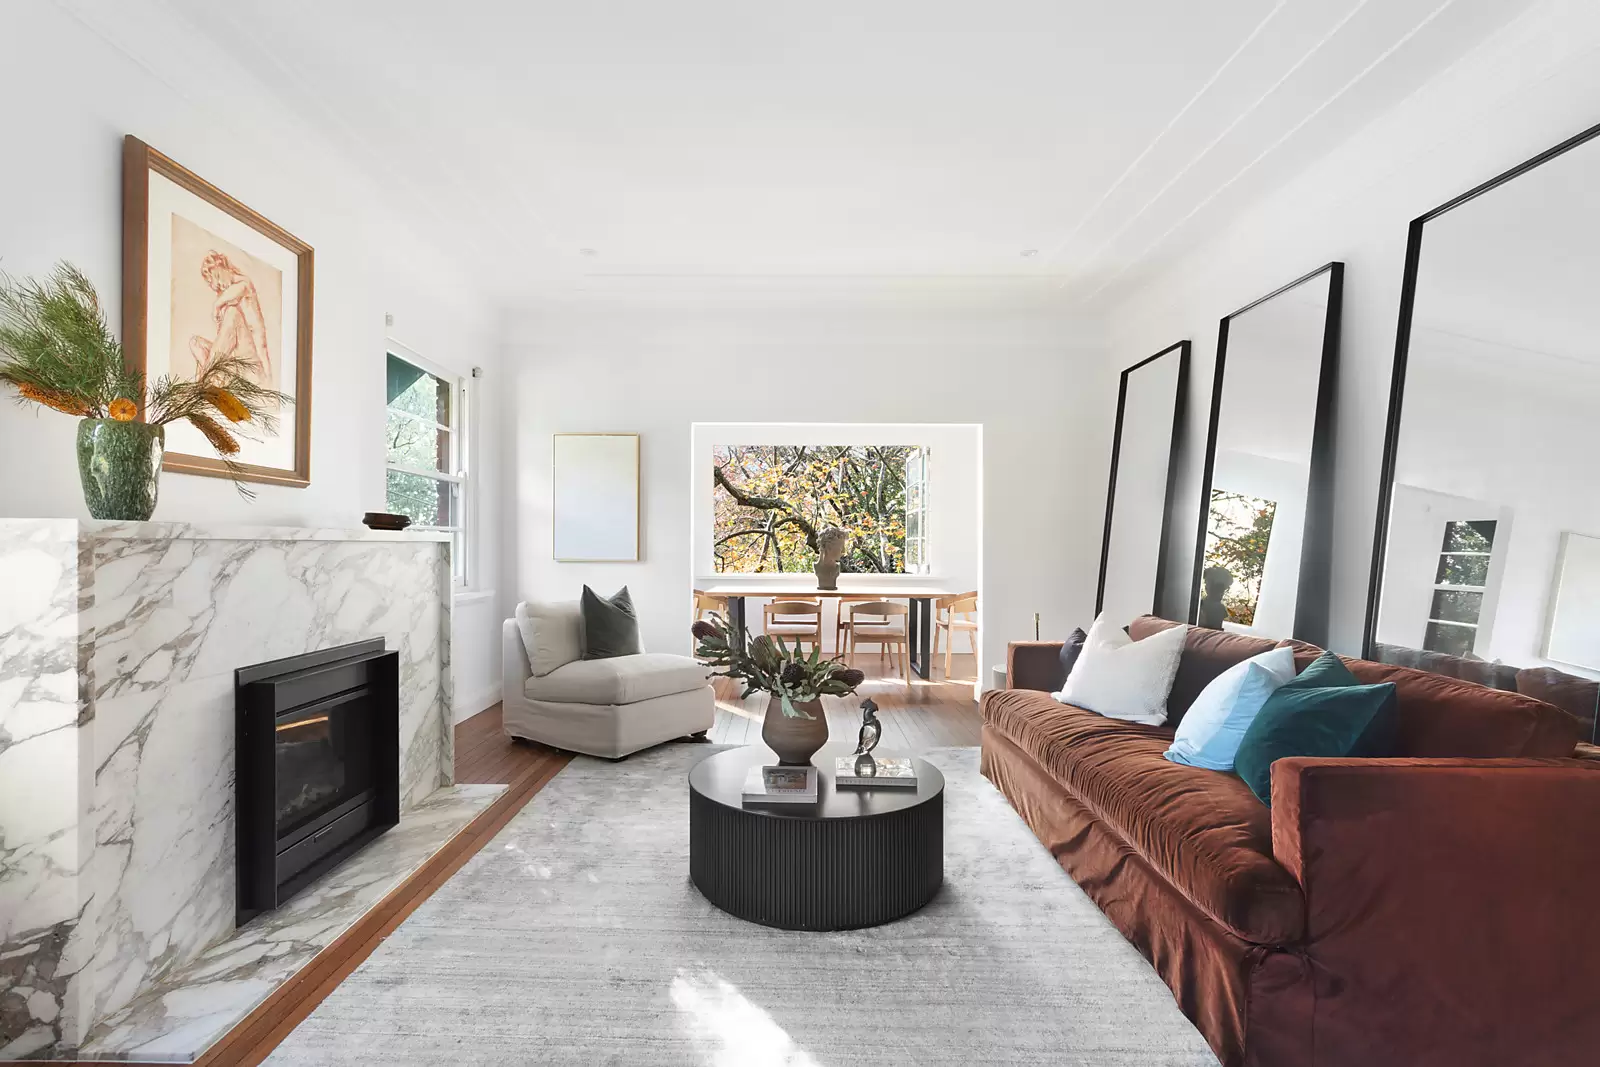 5/12 Rosemont Avenue, Woollahra Auction by Sydney Sotheby's International Realty - image 2